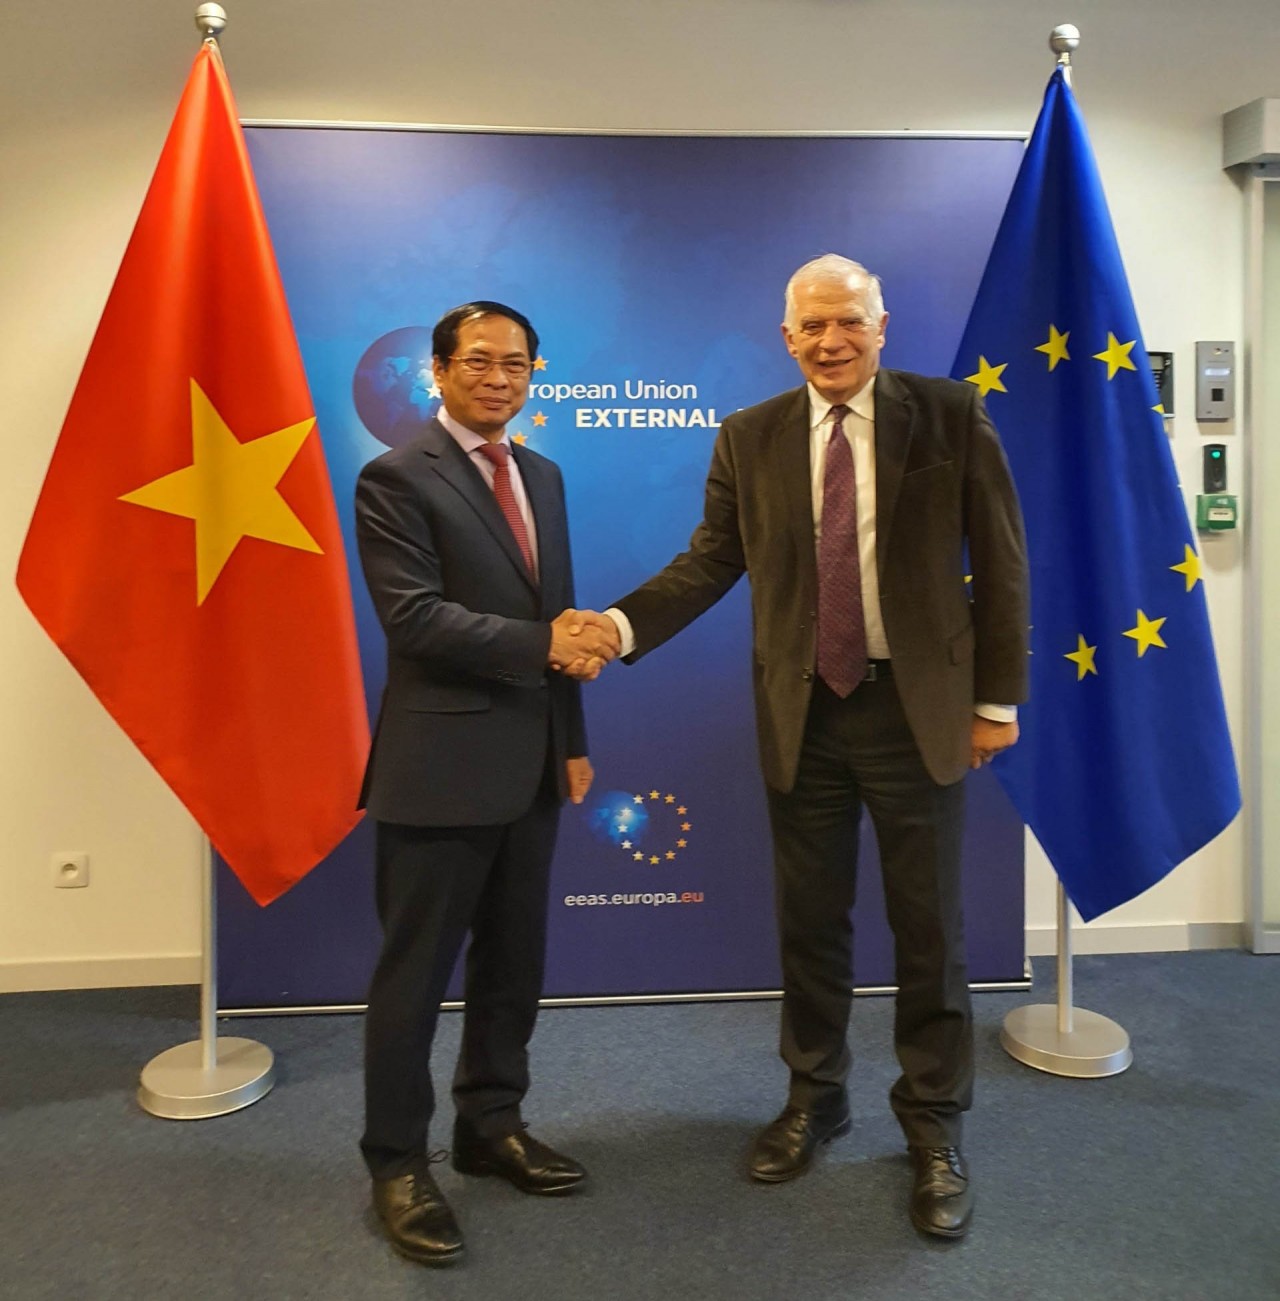 EU considers Vietnam among most important partners in Indo-Pacific: Josep Borrell